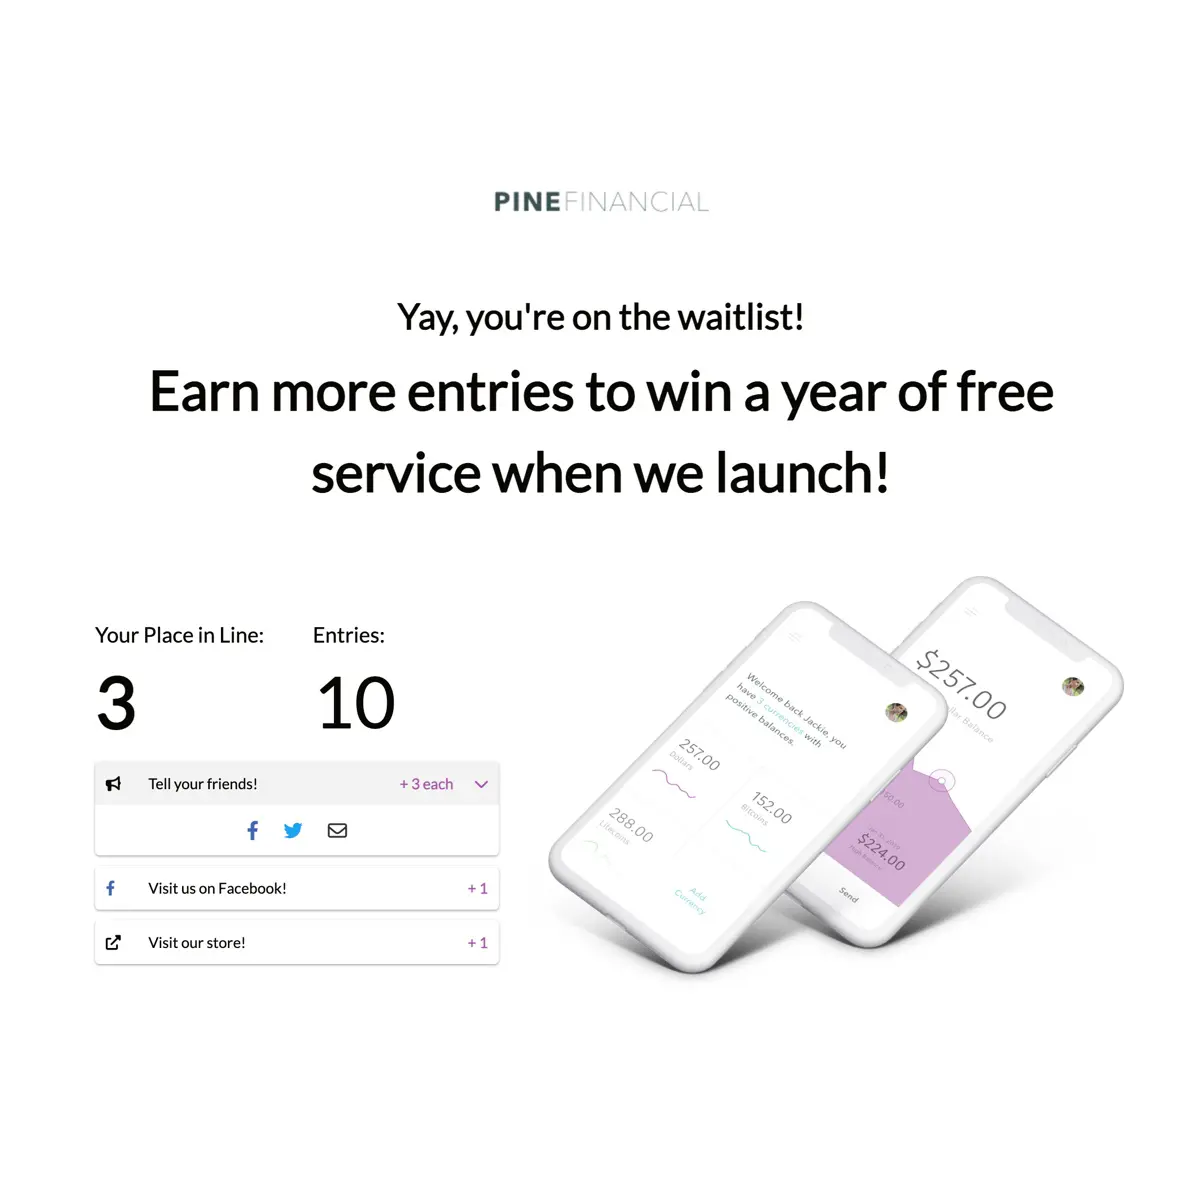 Product launch waitlist combined with a sweepstakes.